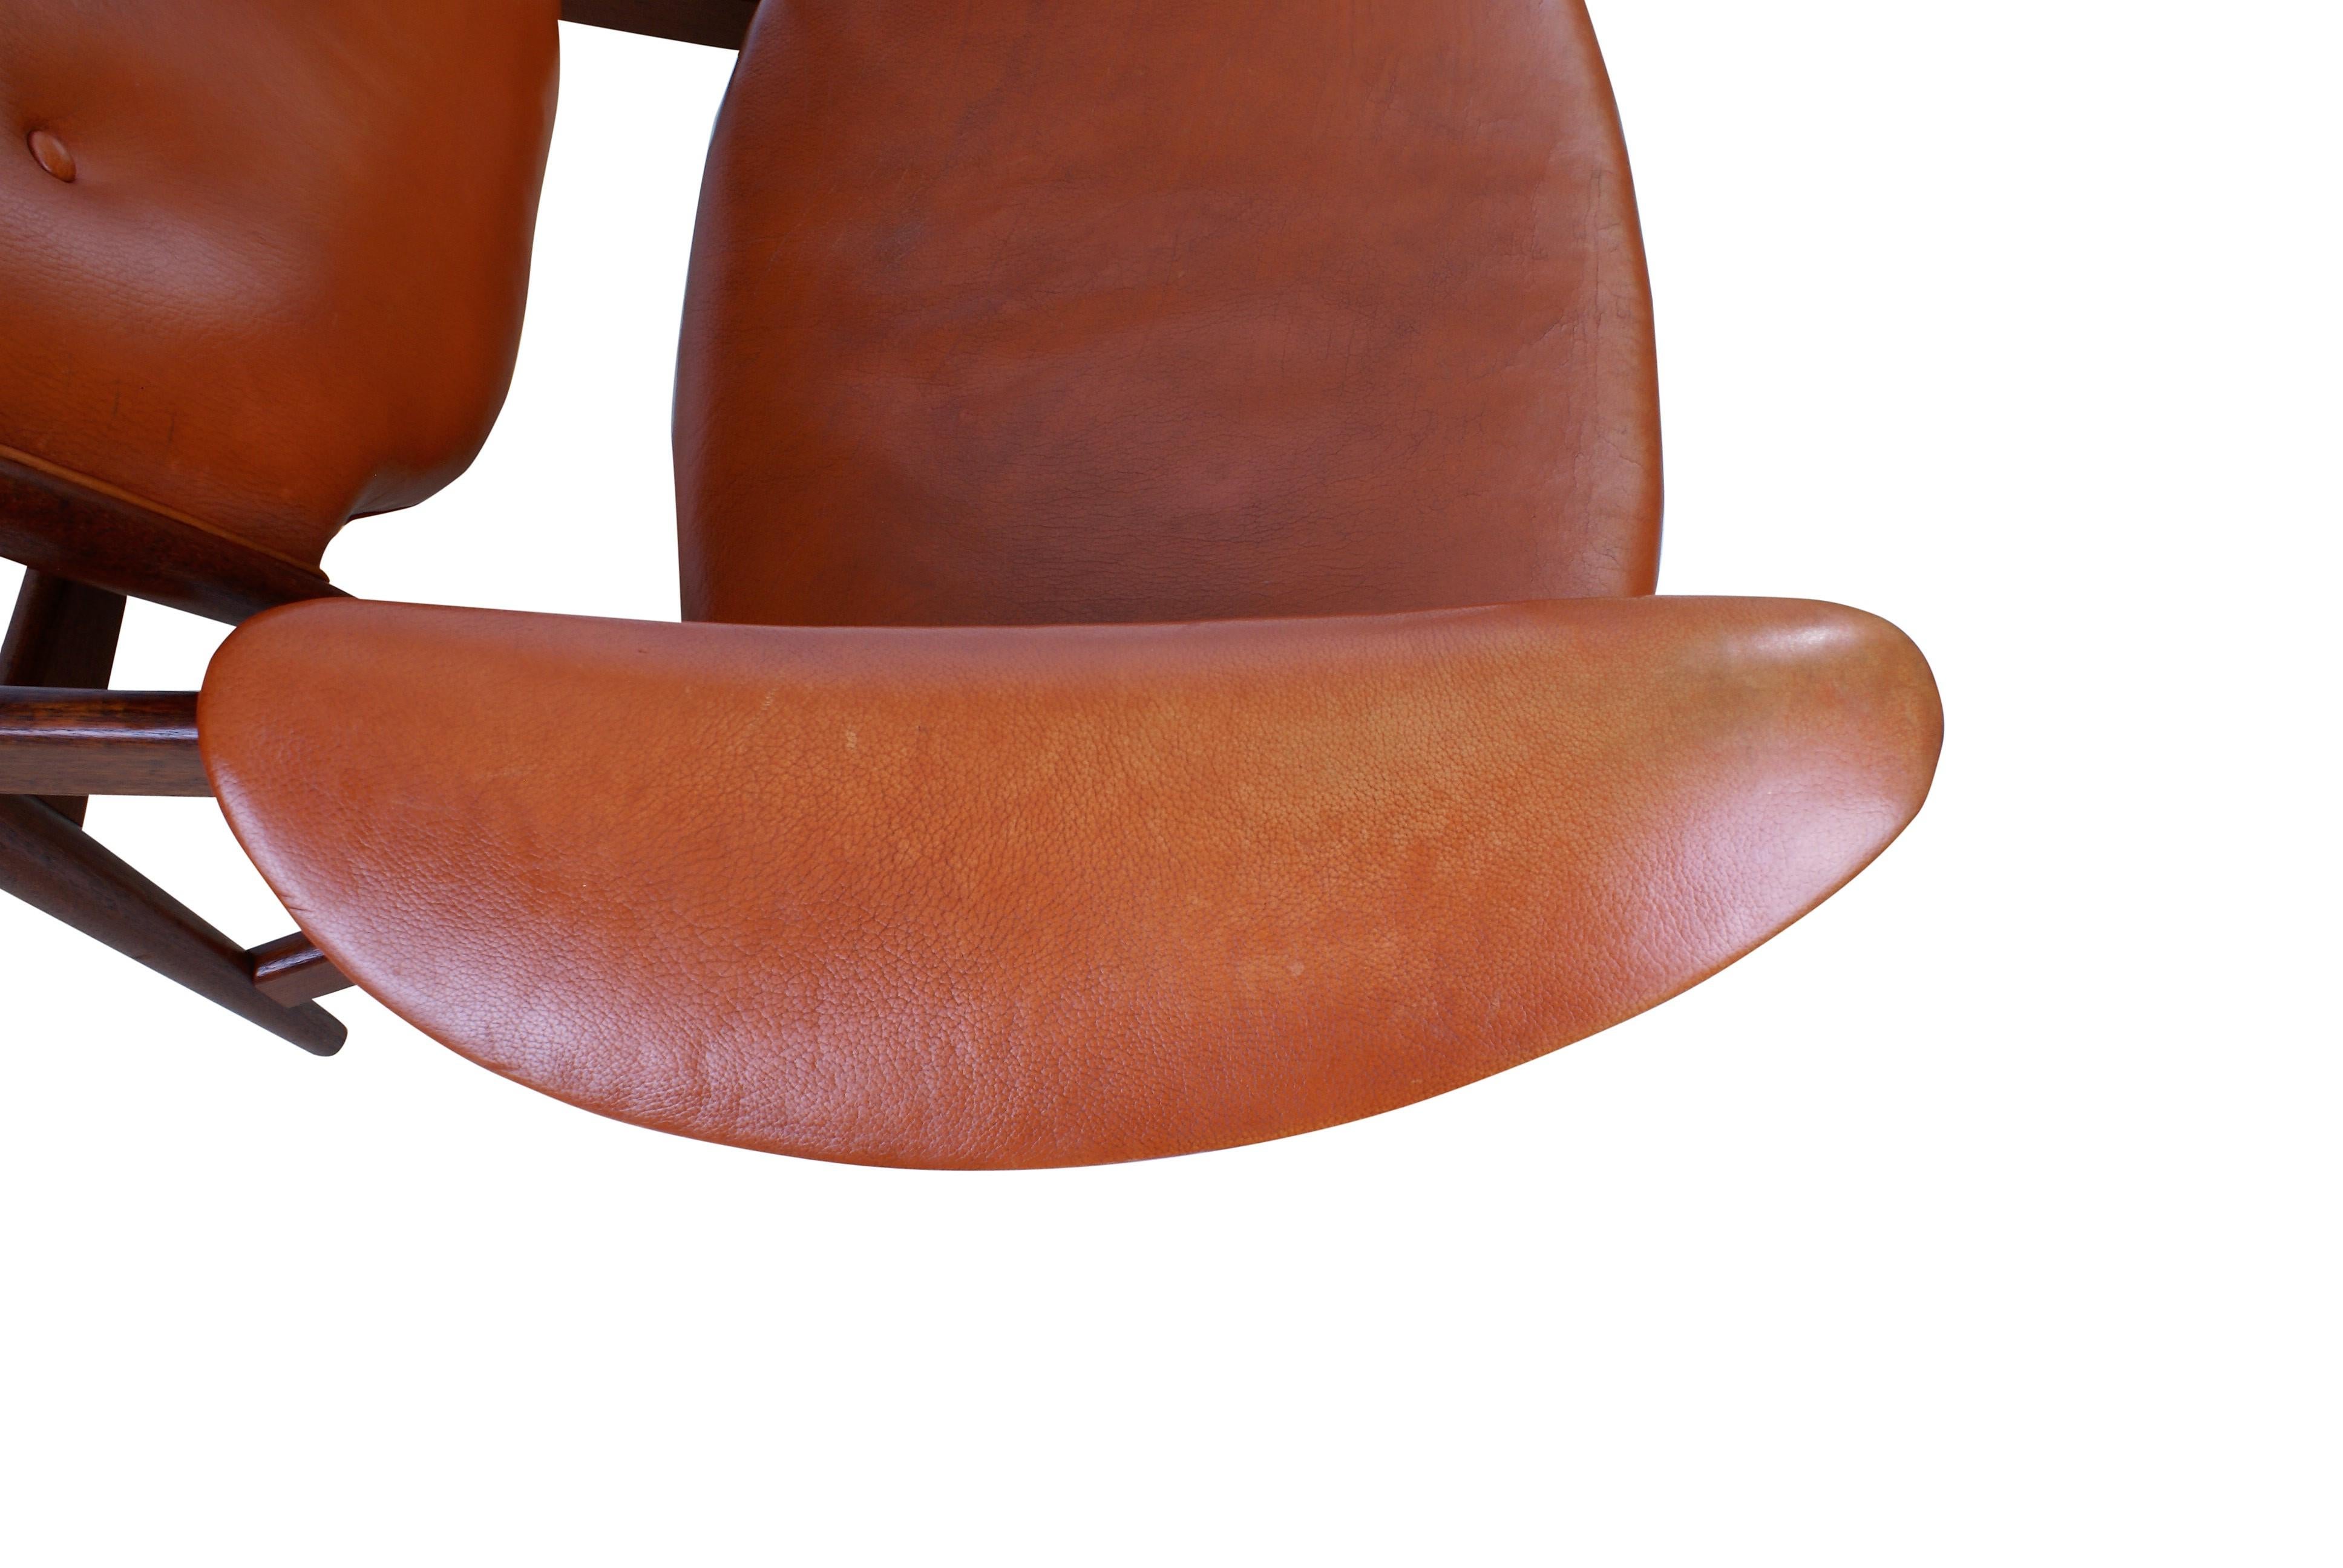 Finn Juhl Rare 'Chieftain' Chair in Teak and Leather for Niels Vodder, 1949 For Sale 6